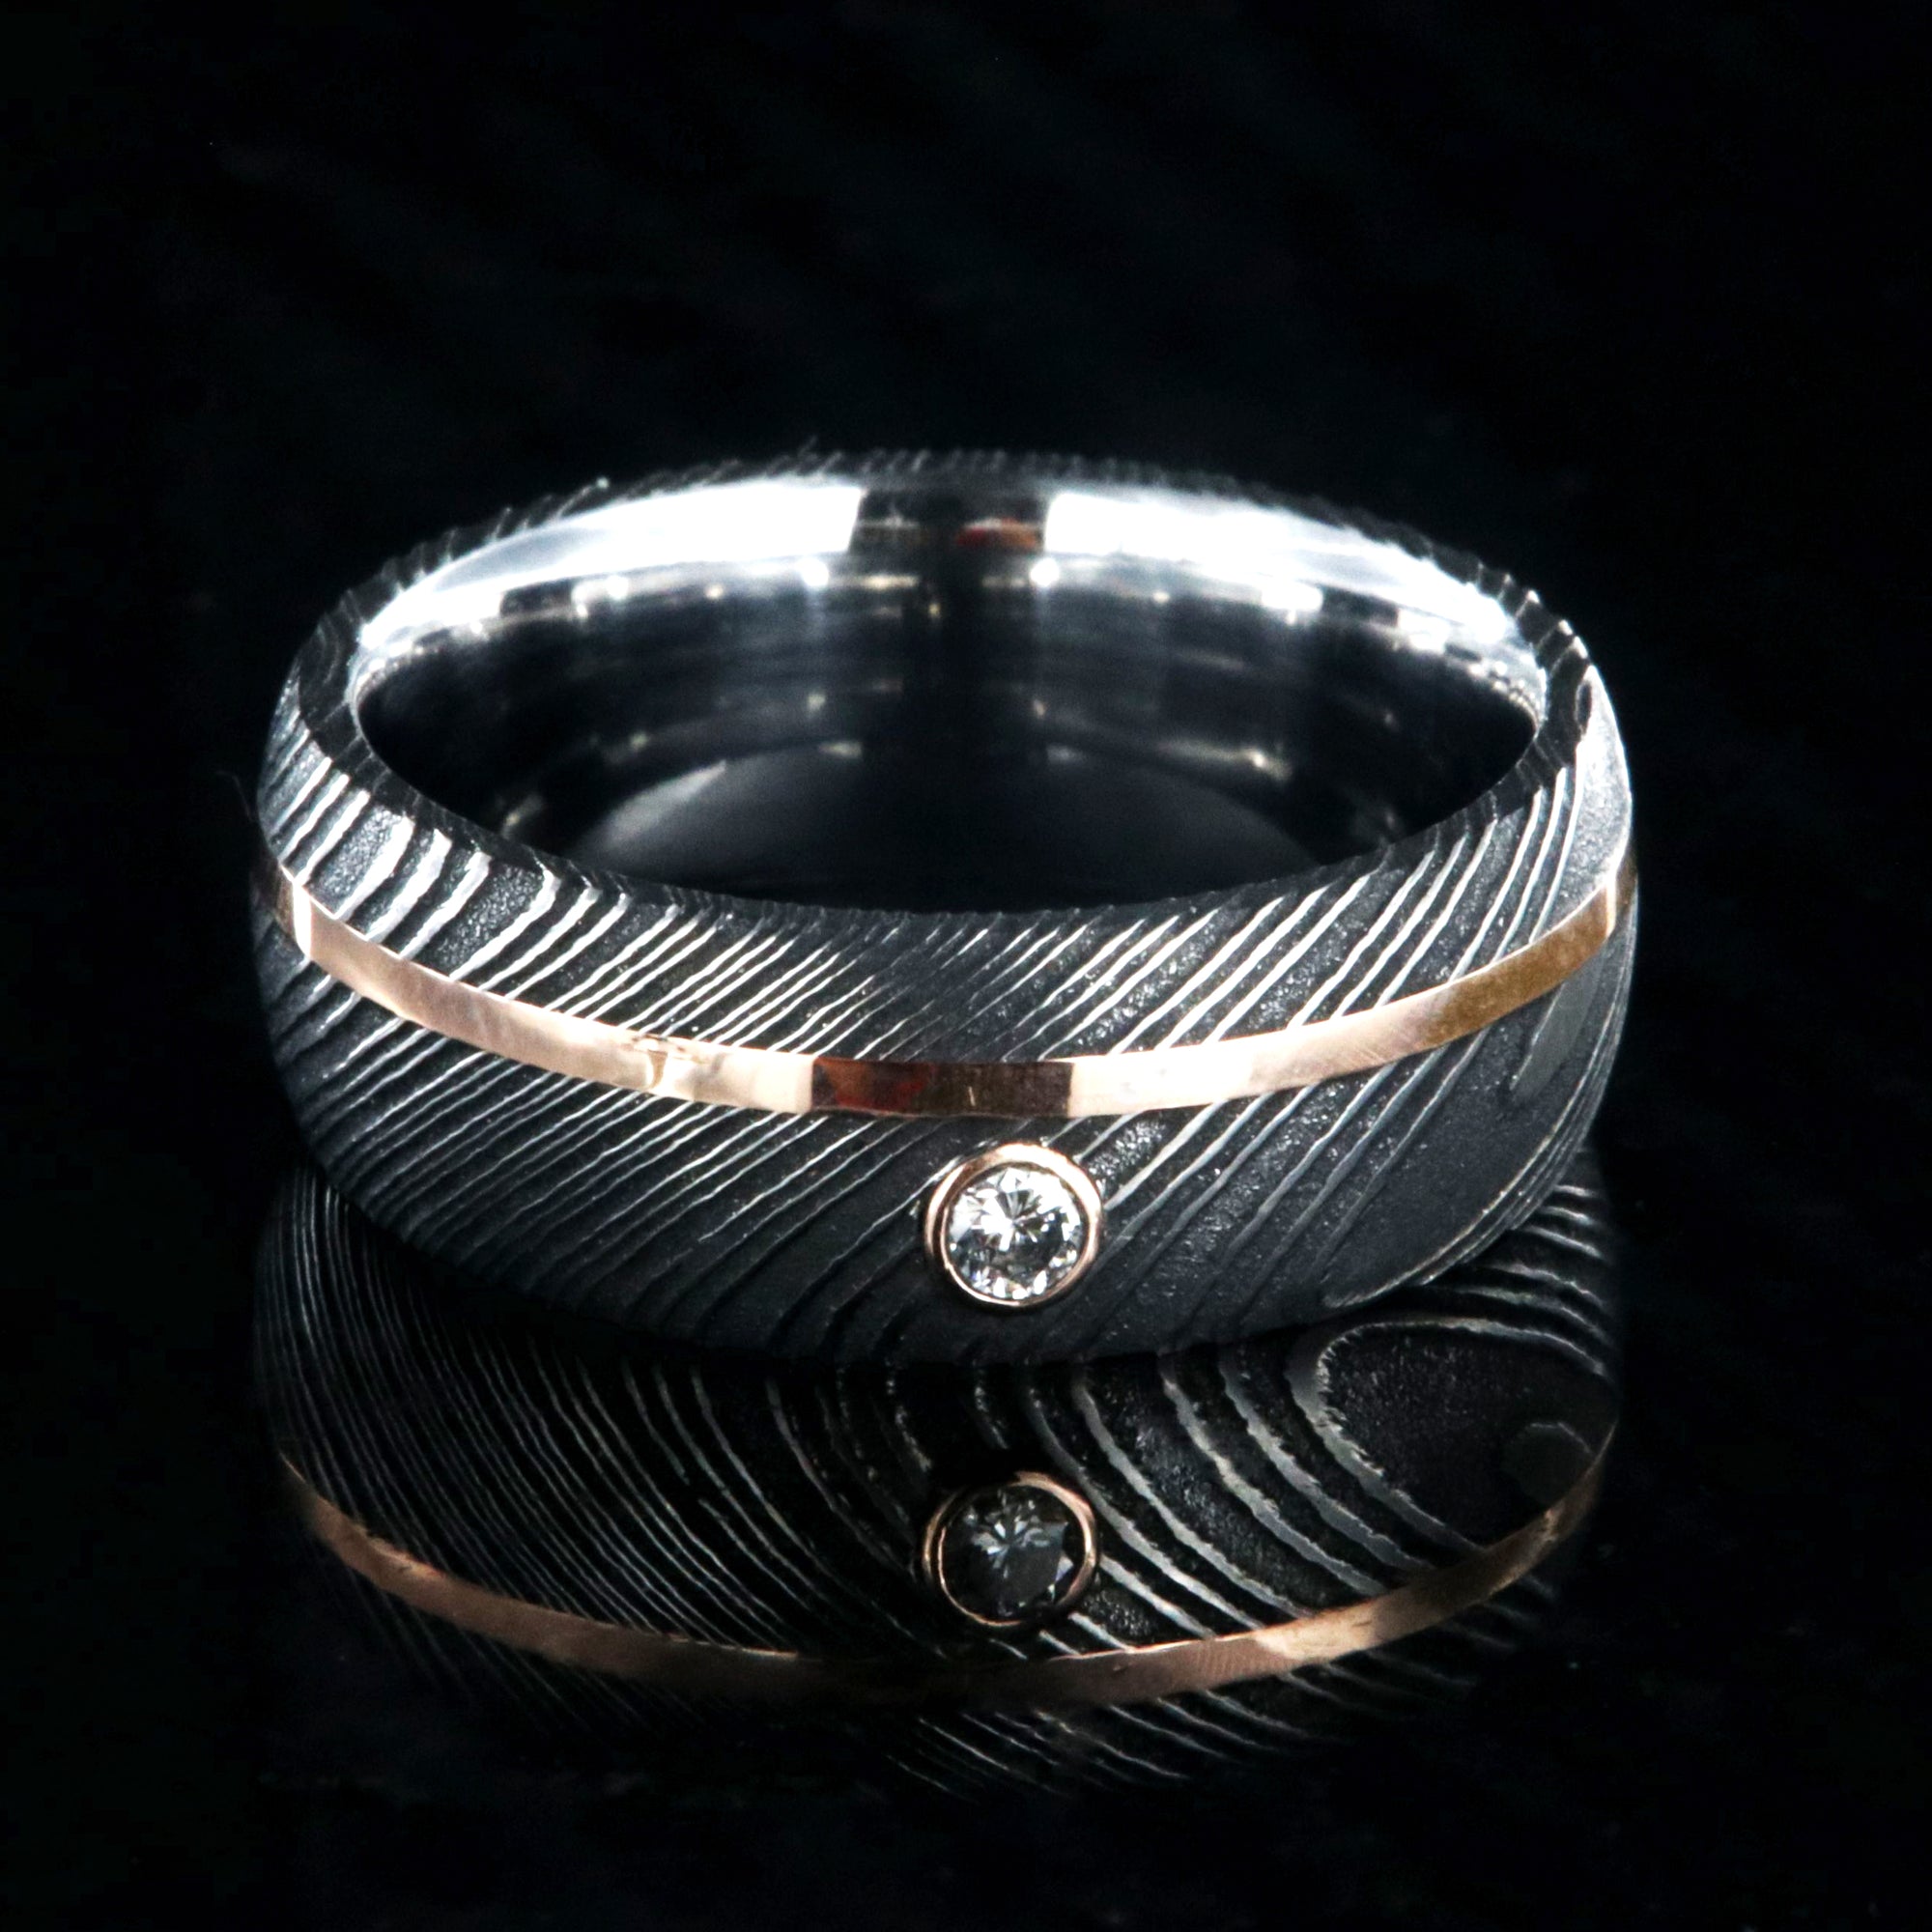 8mm wide black Damascus steel ring with rounded profile, polished inside, an off-center rose gold inlay and 3mm round bezel set diamond